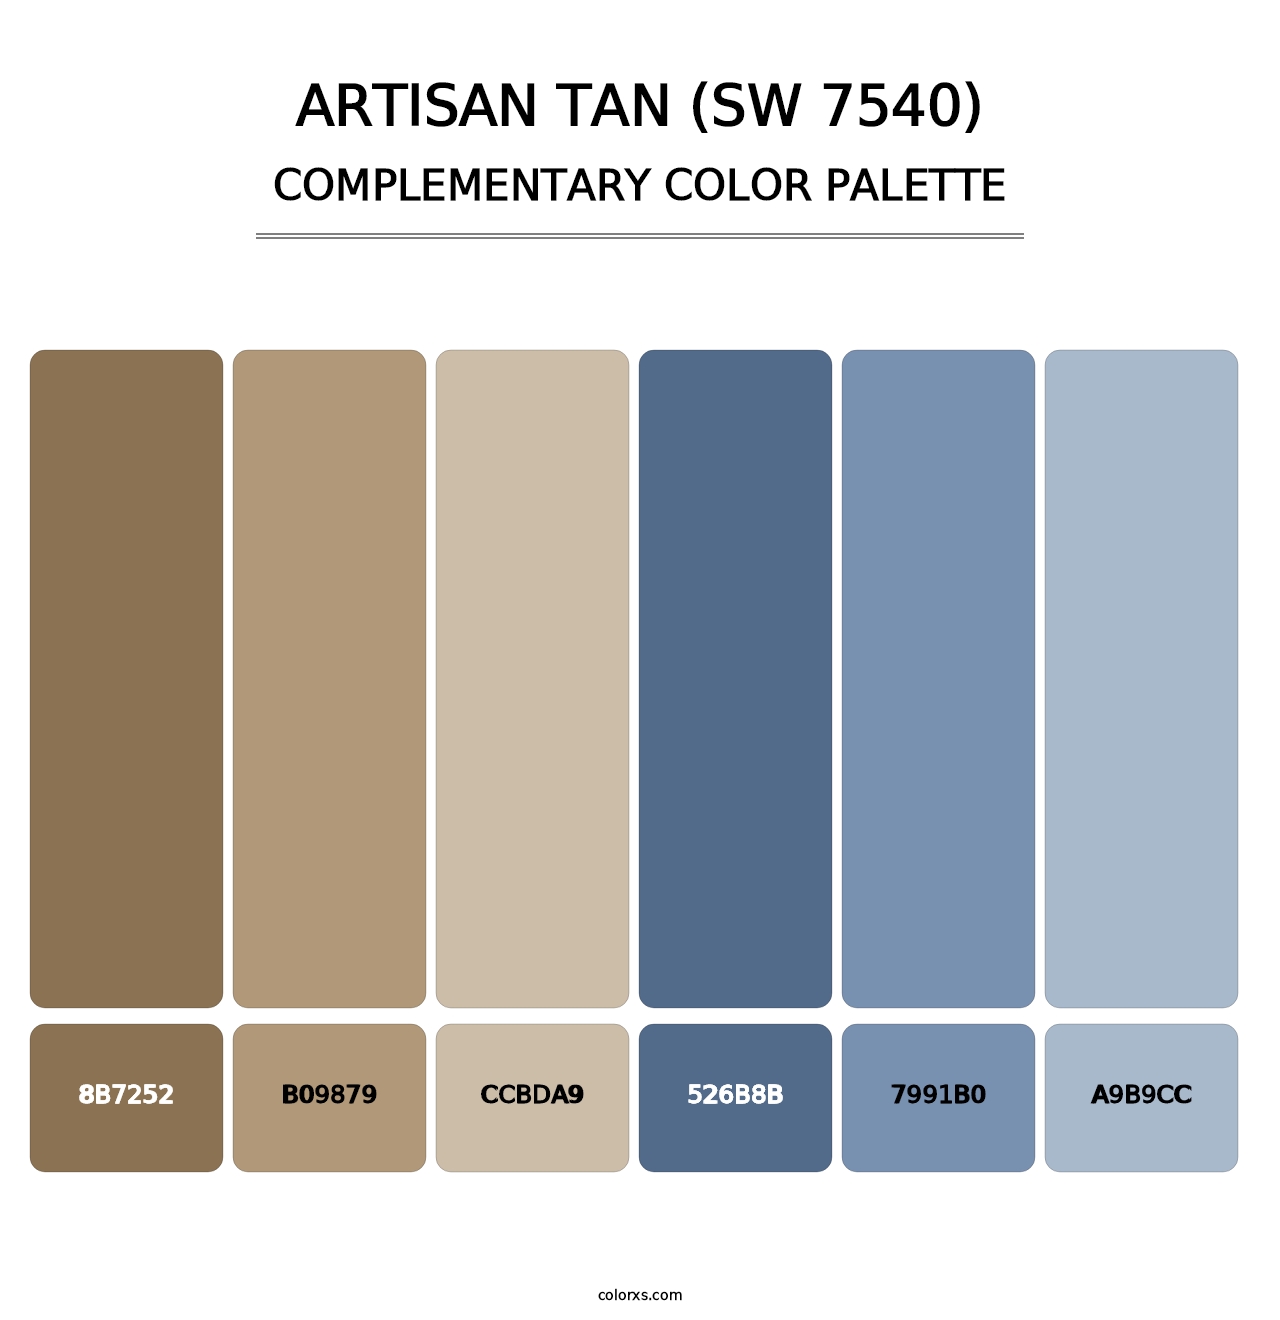 Artisan Tan (SW 7540) - Complementary Color Palette